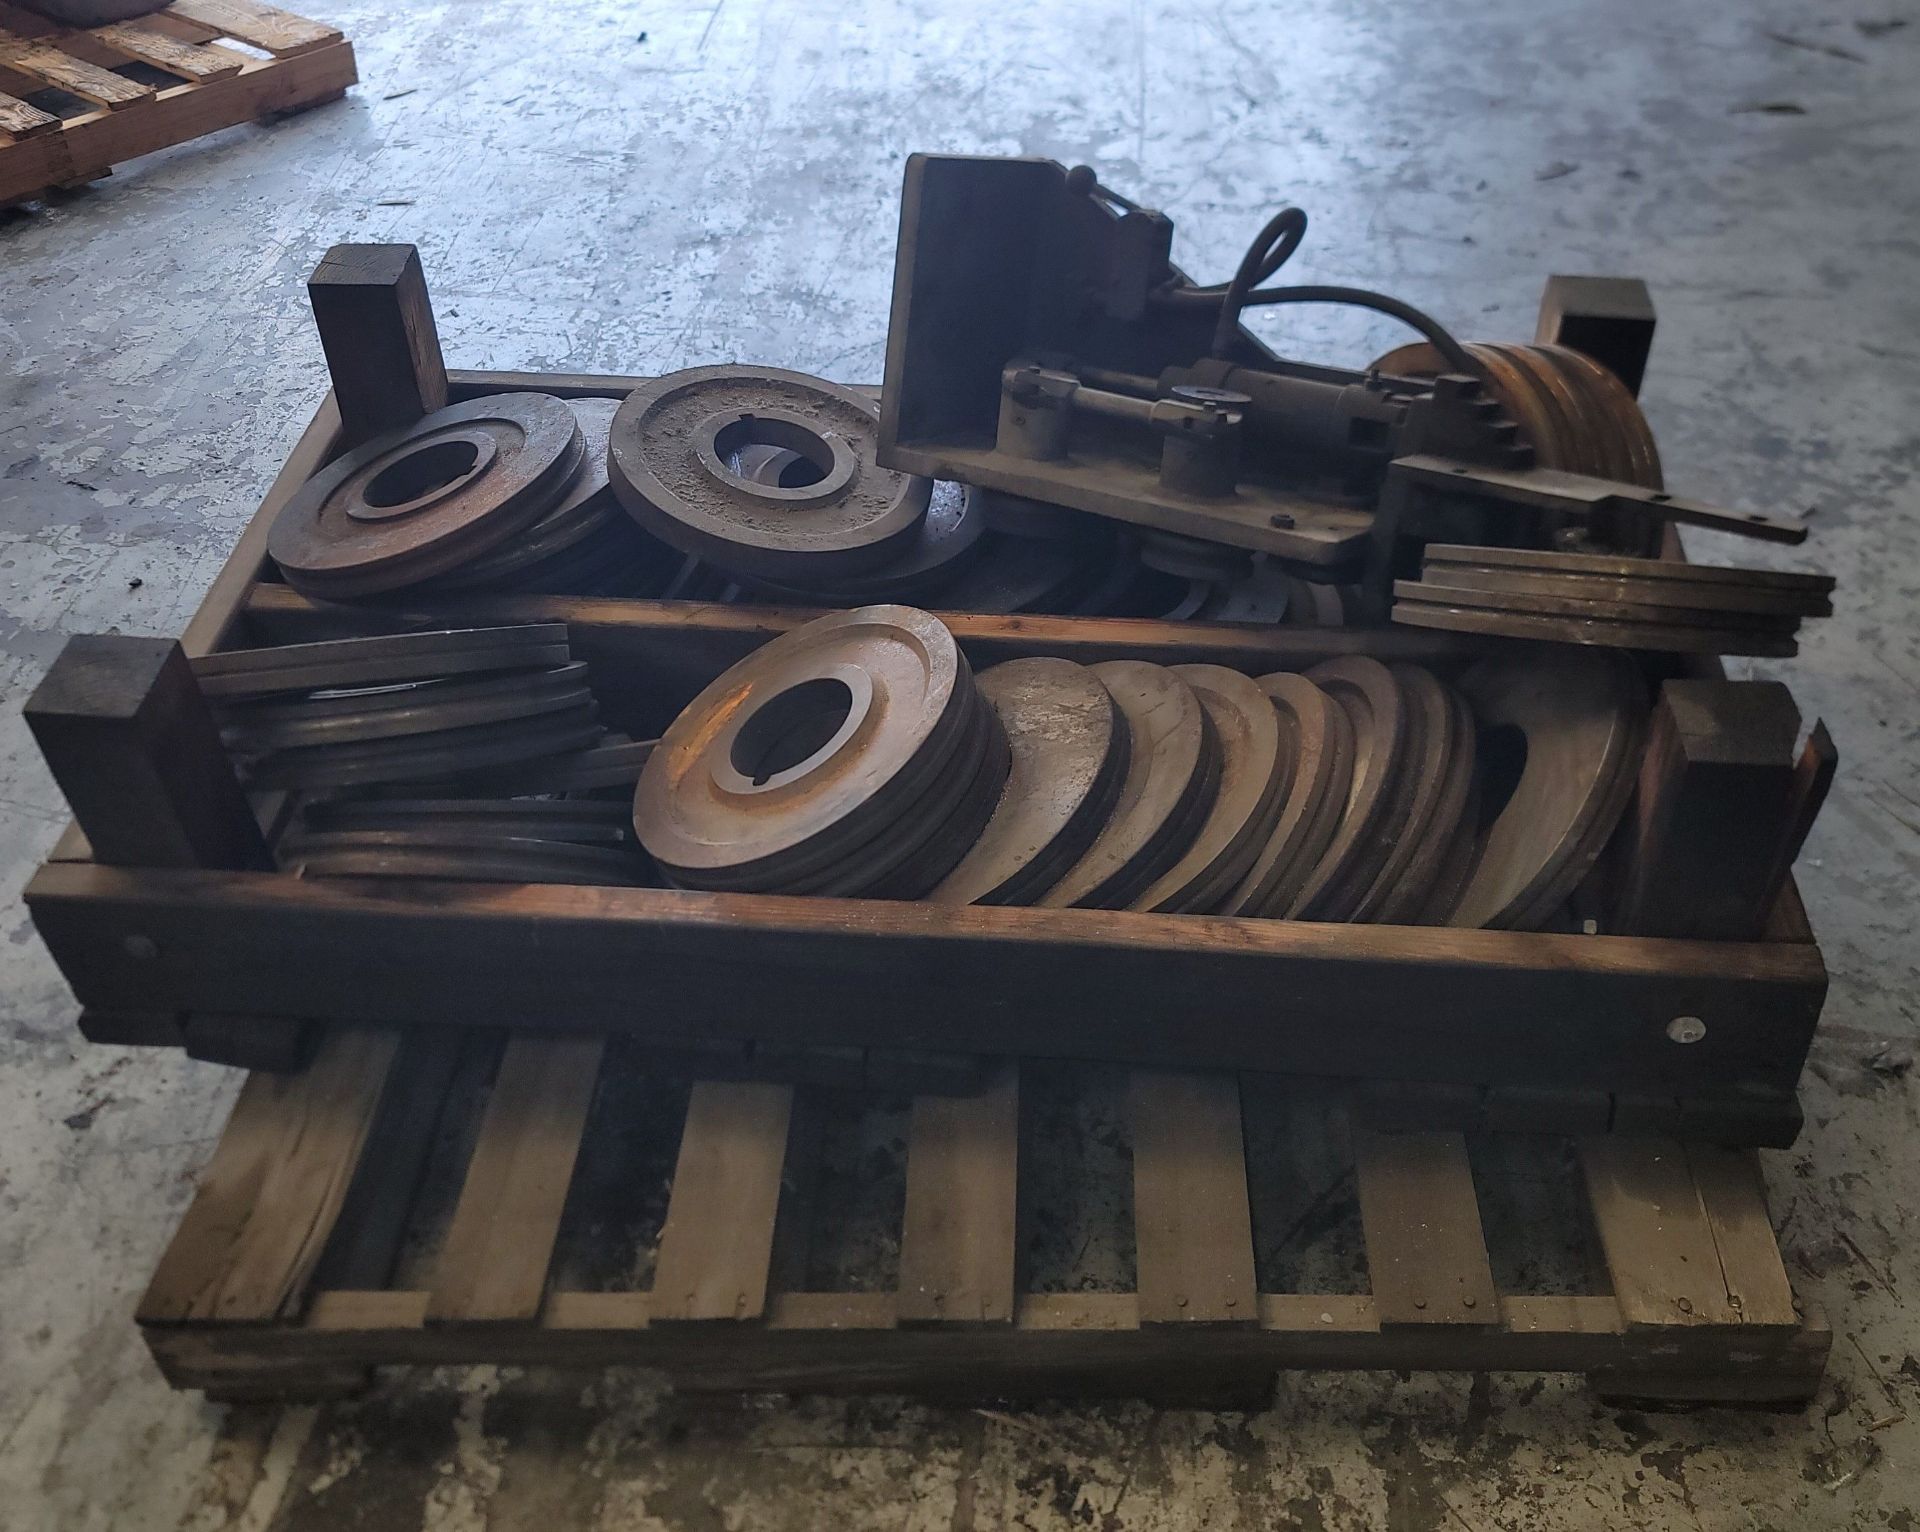 LOT - STEEL MACHINE PARTS IN CRATE, CRATE MEASURES 53" X 30", (LOCATION: RIVERSIDE, CA) - Image 2 of 3